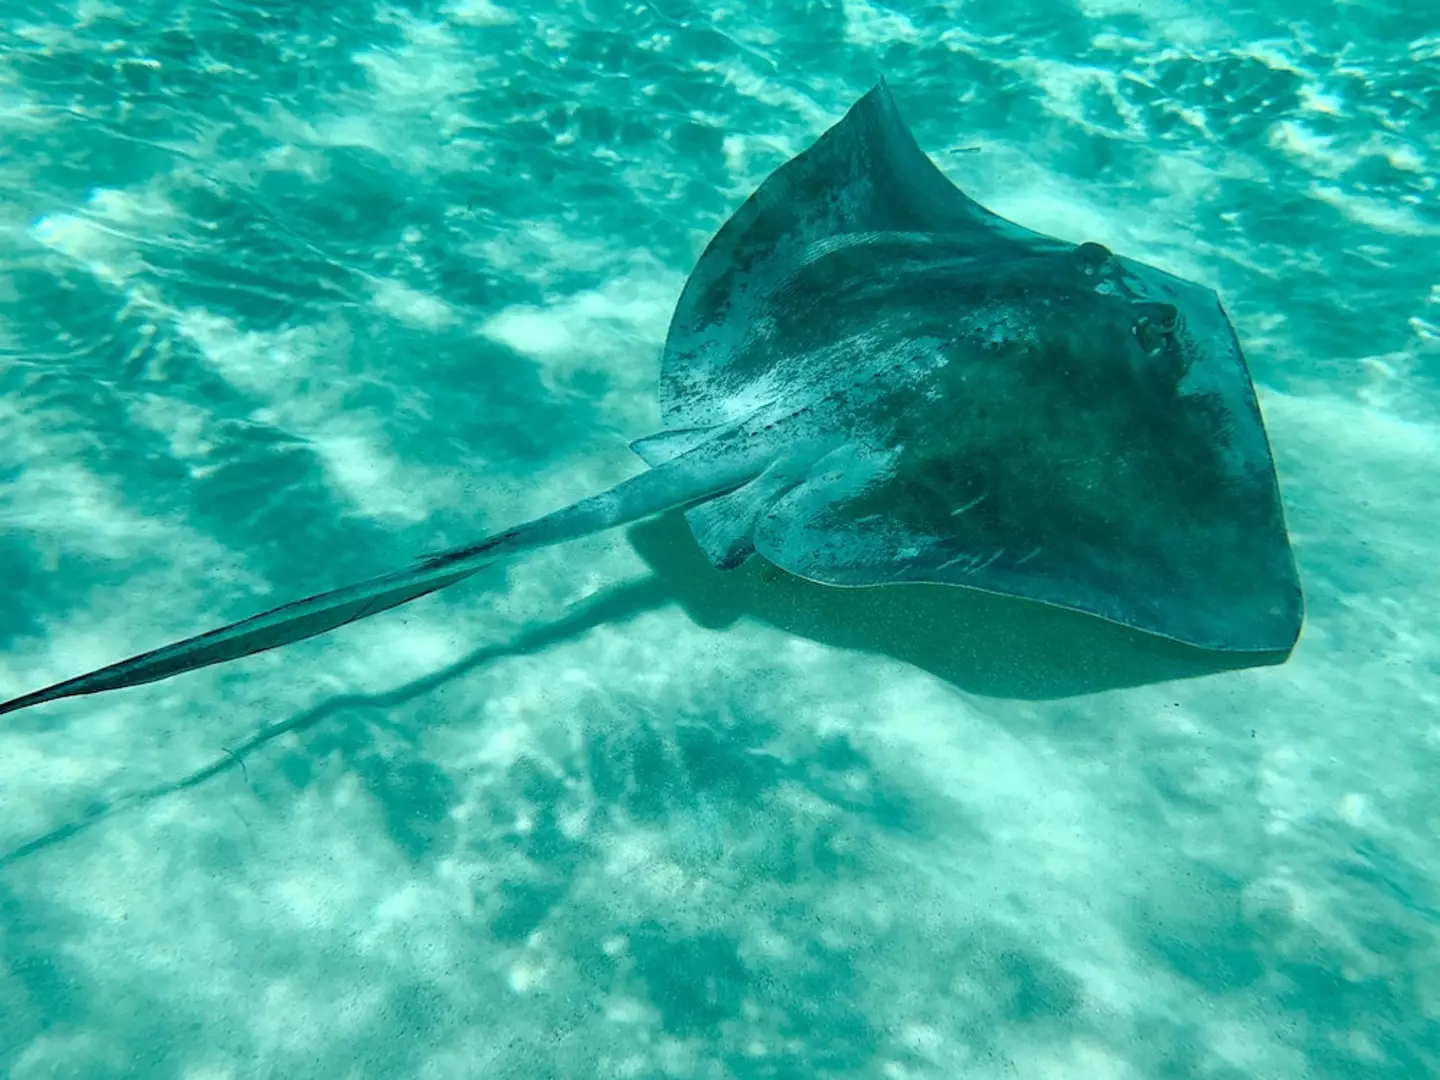 A stingray injury is caused by its venomous tail barb.